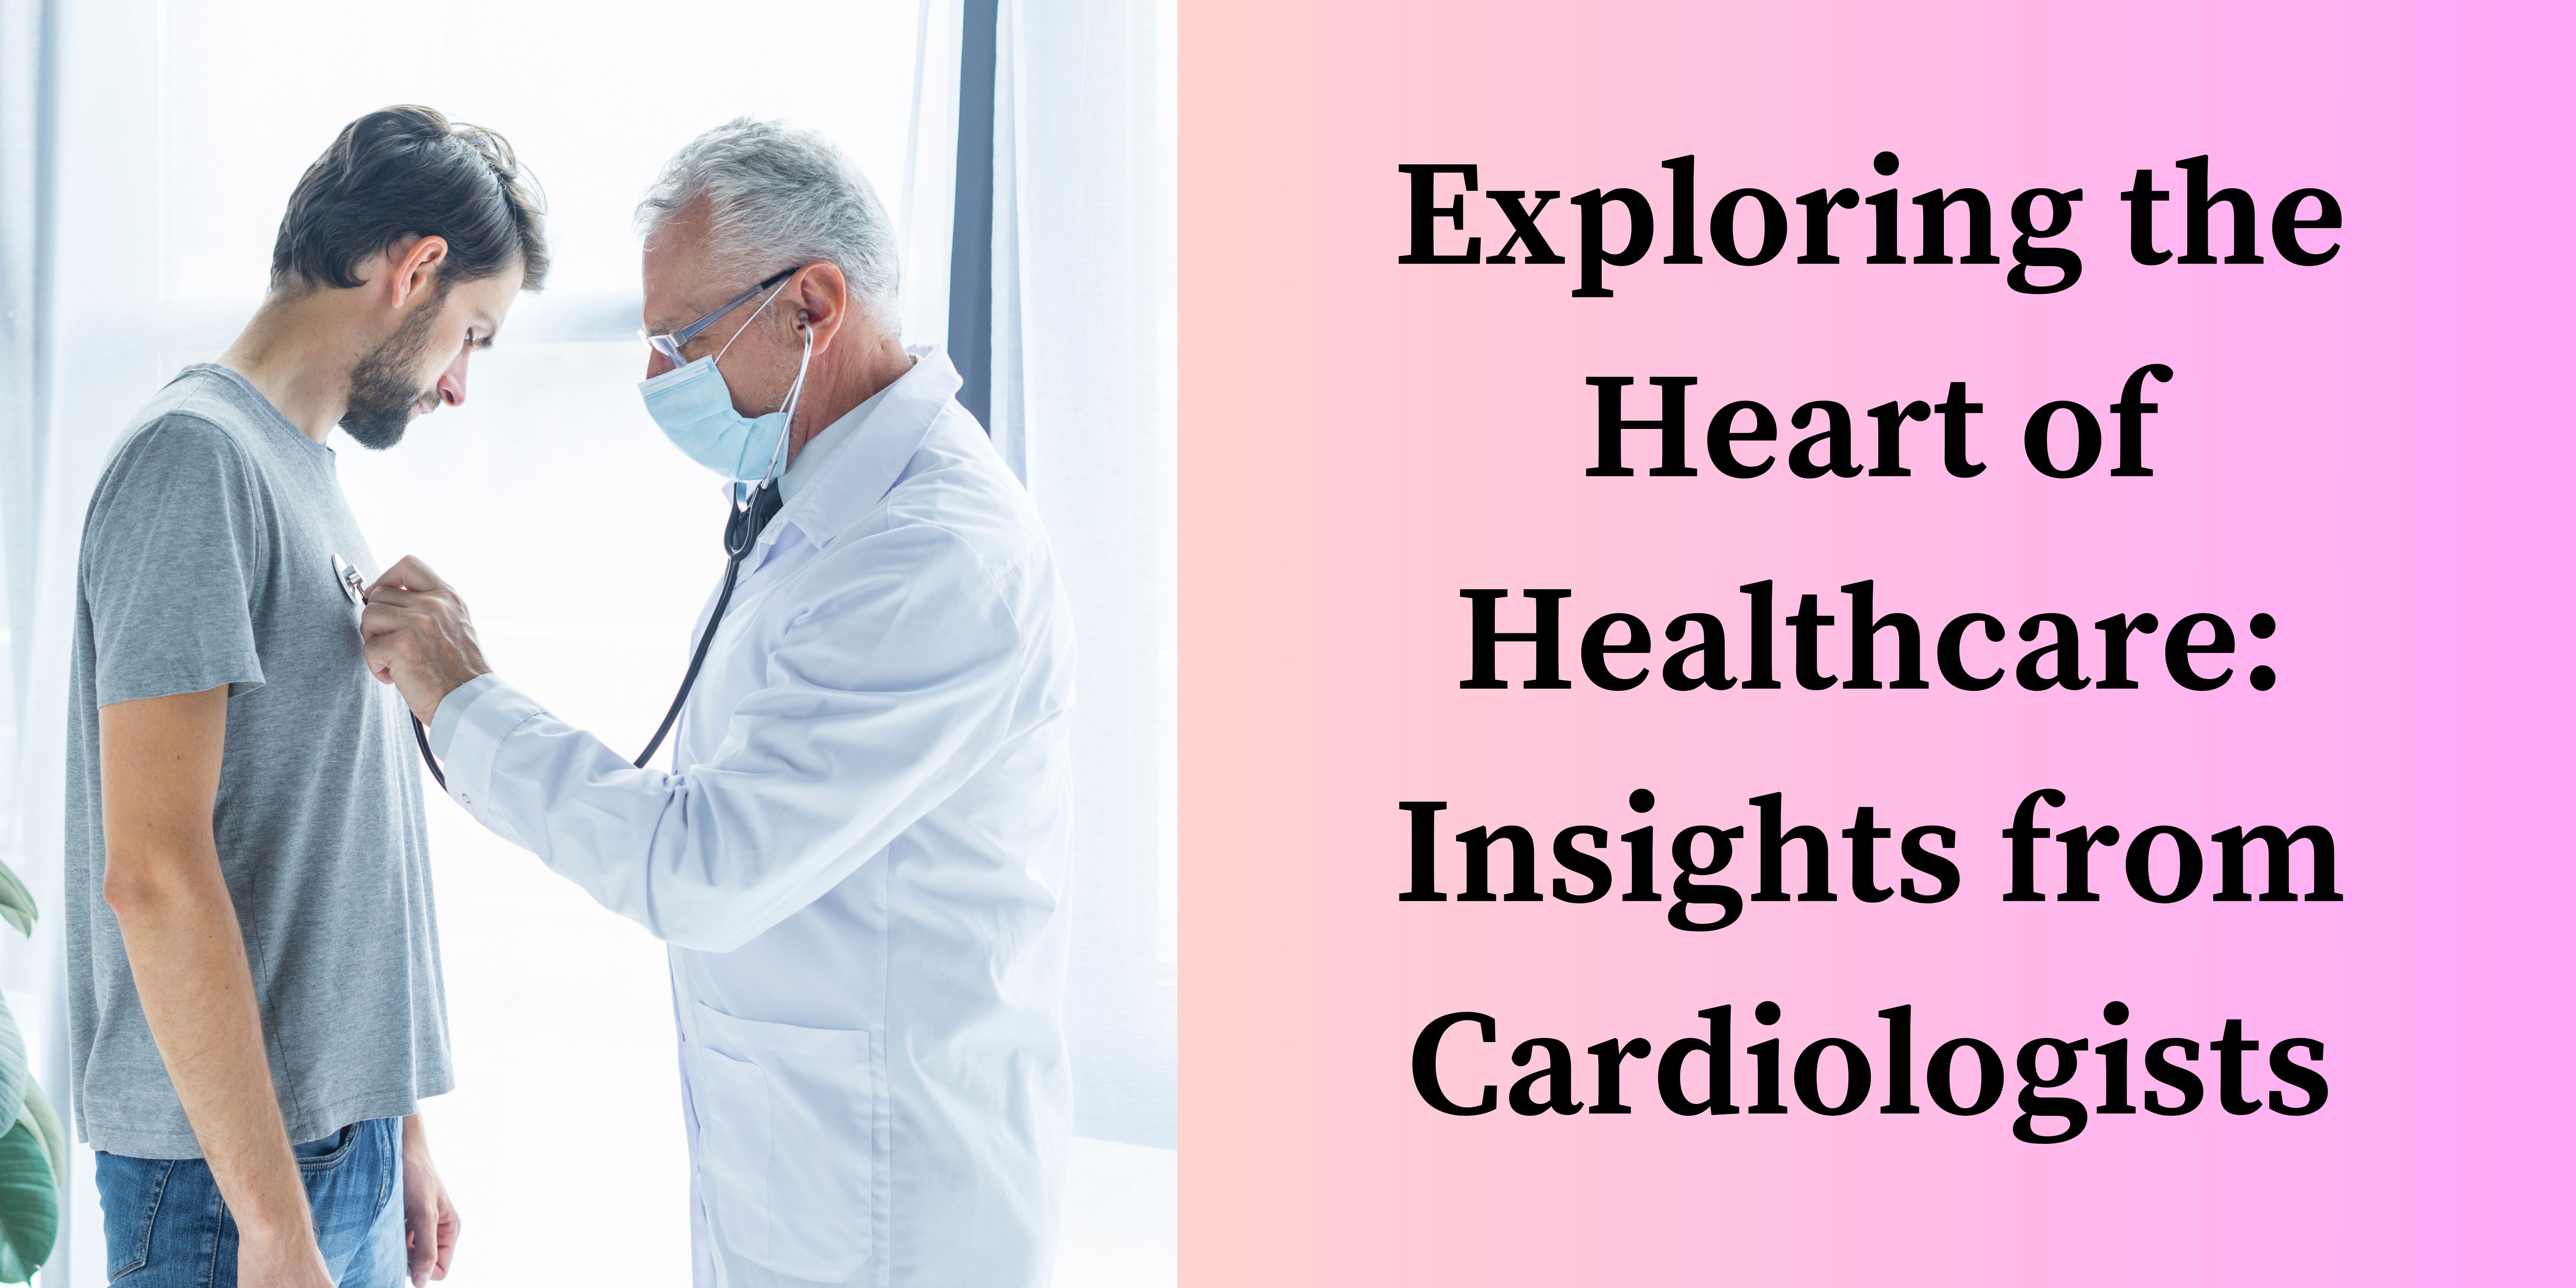 Exploring the Heart of Healthcare: Insights from Cardiologists